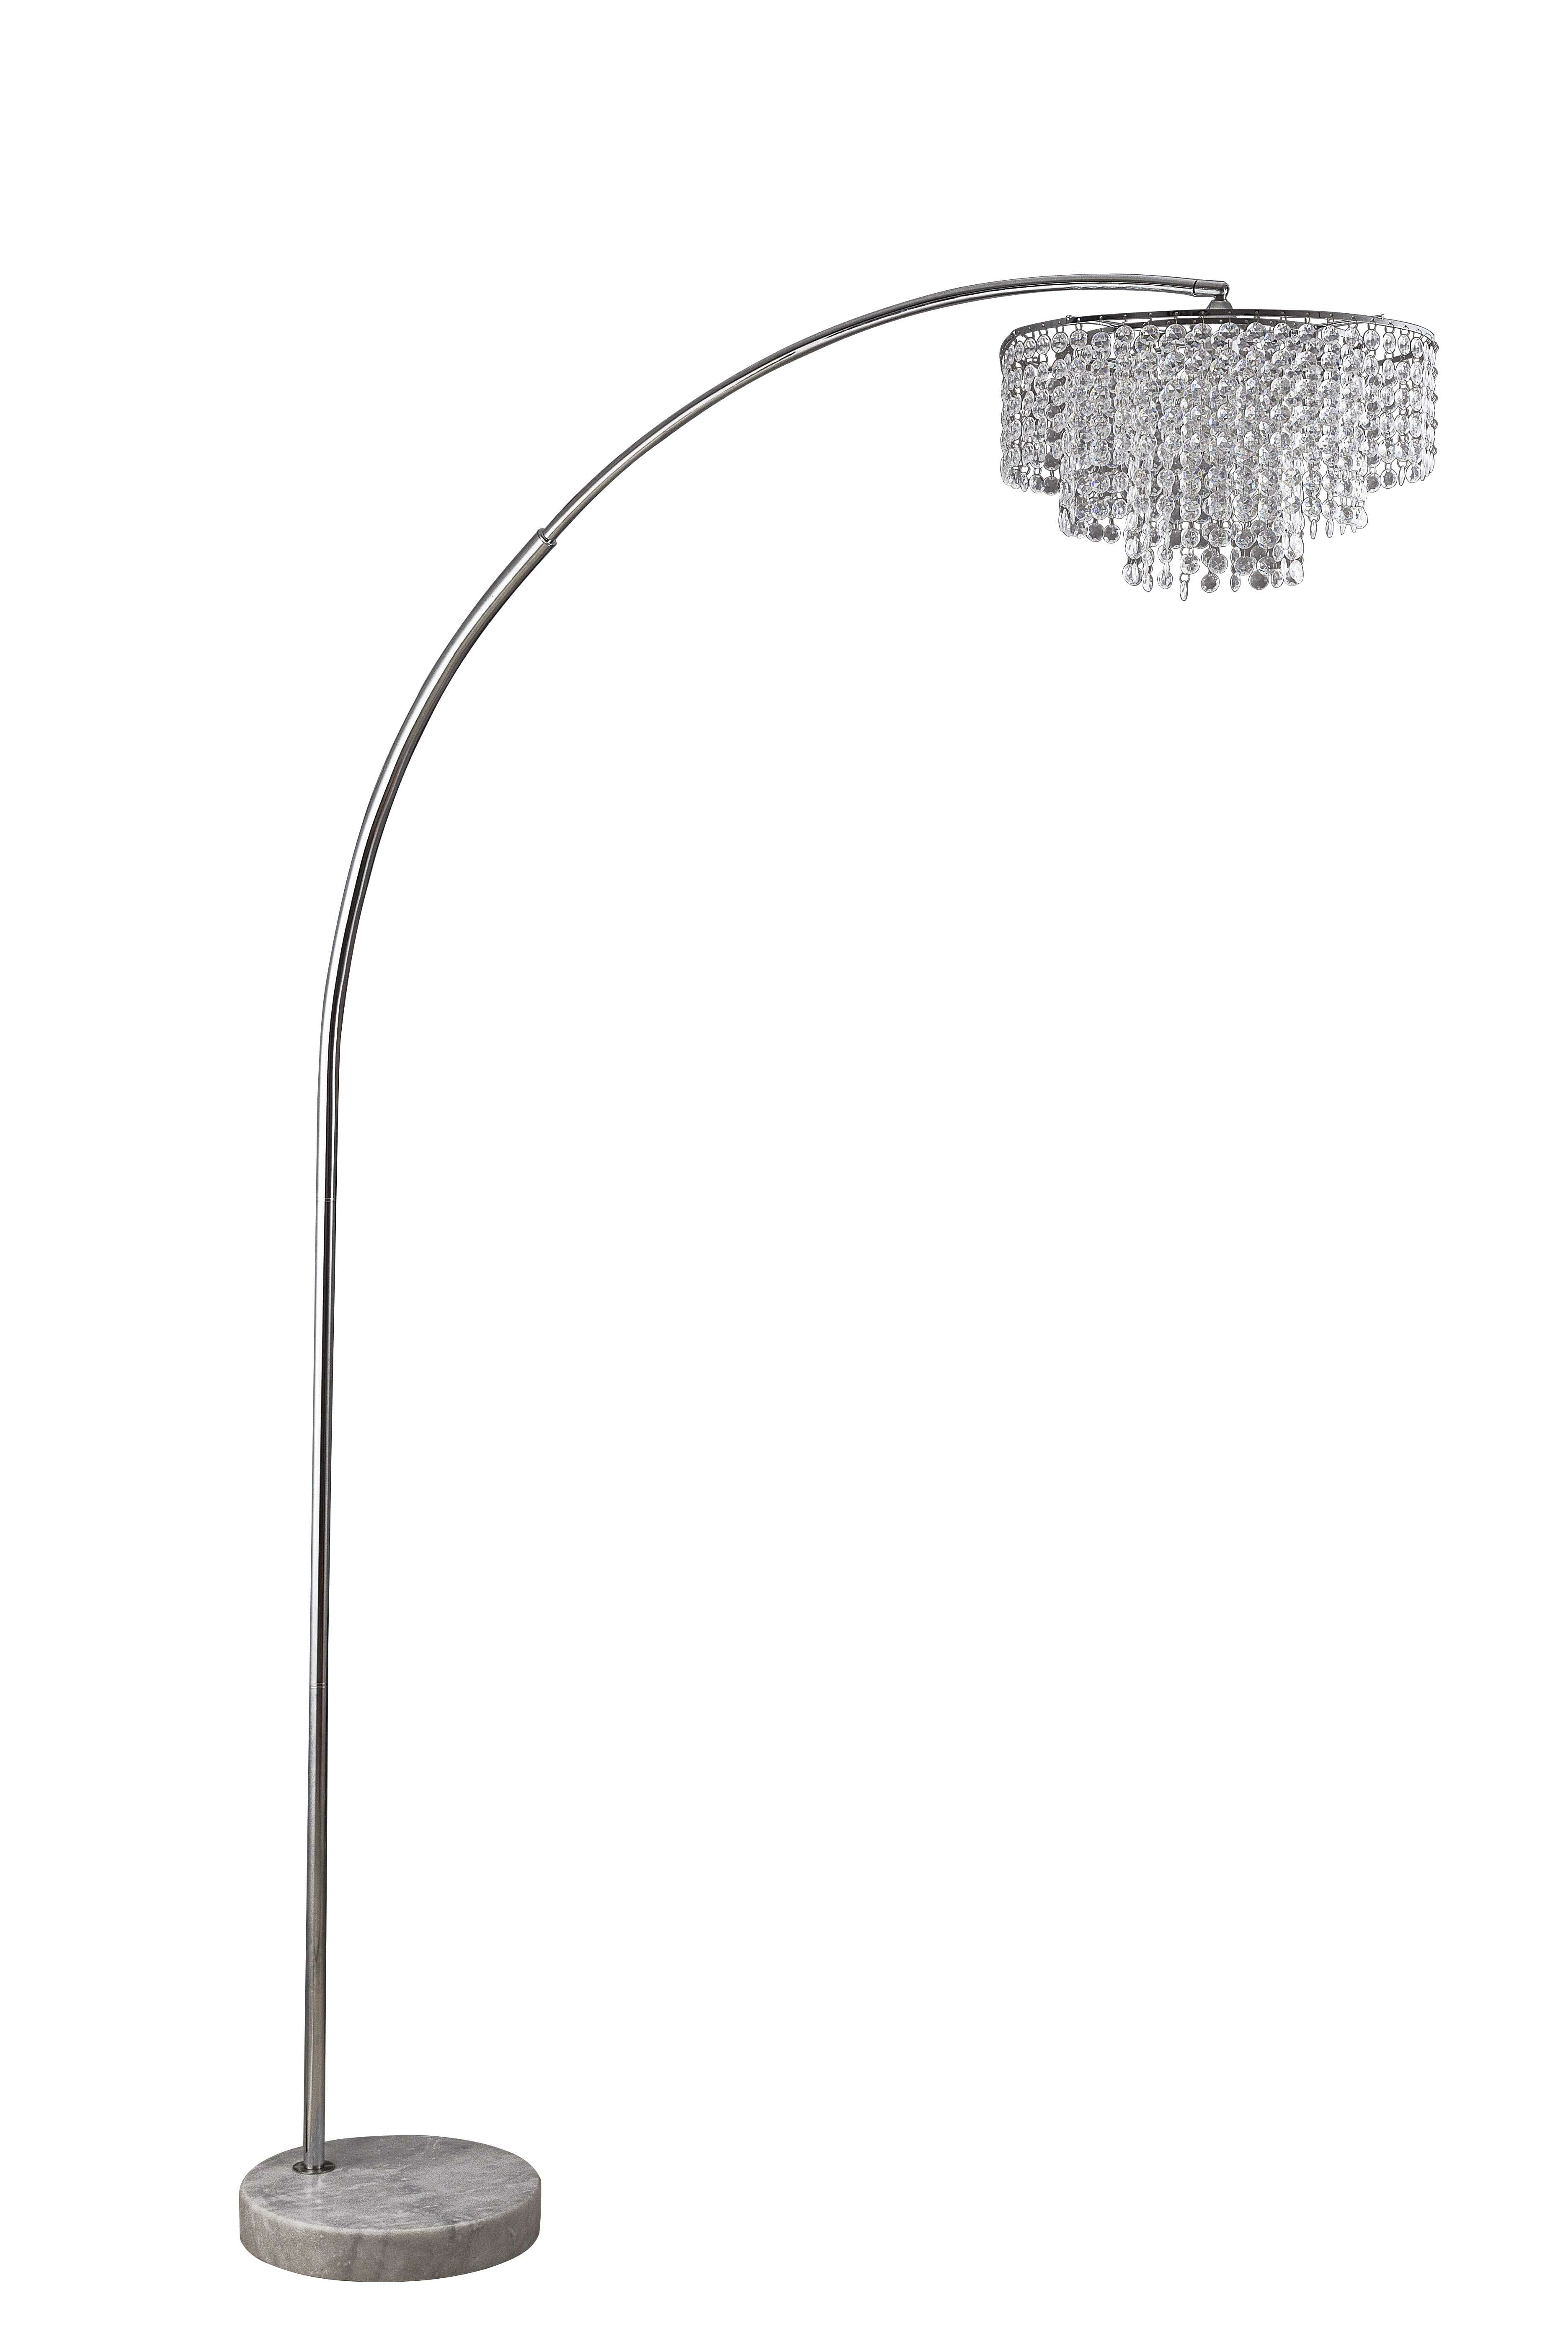 Meda 87 Arched Floor Lamp pertaining to size 3744 X 5616